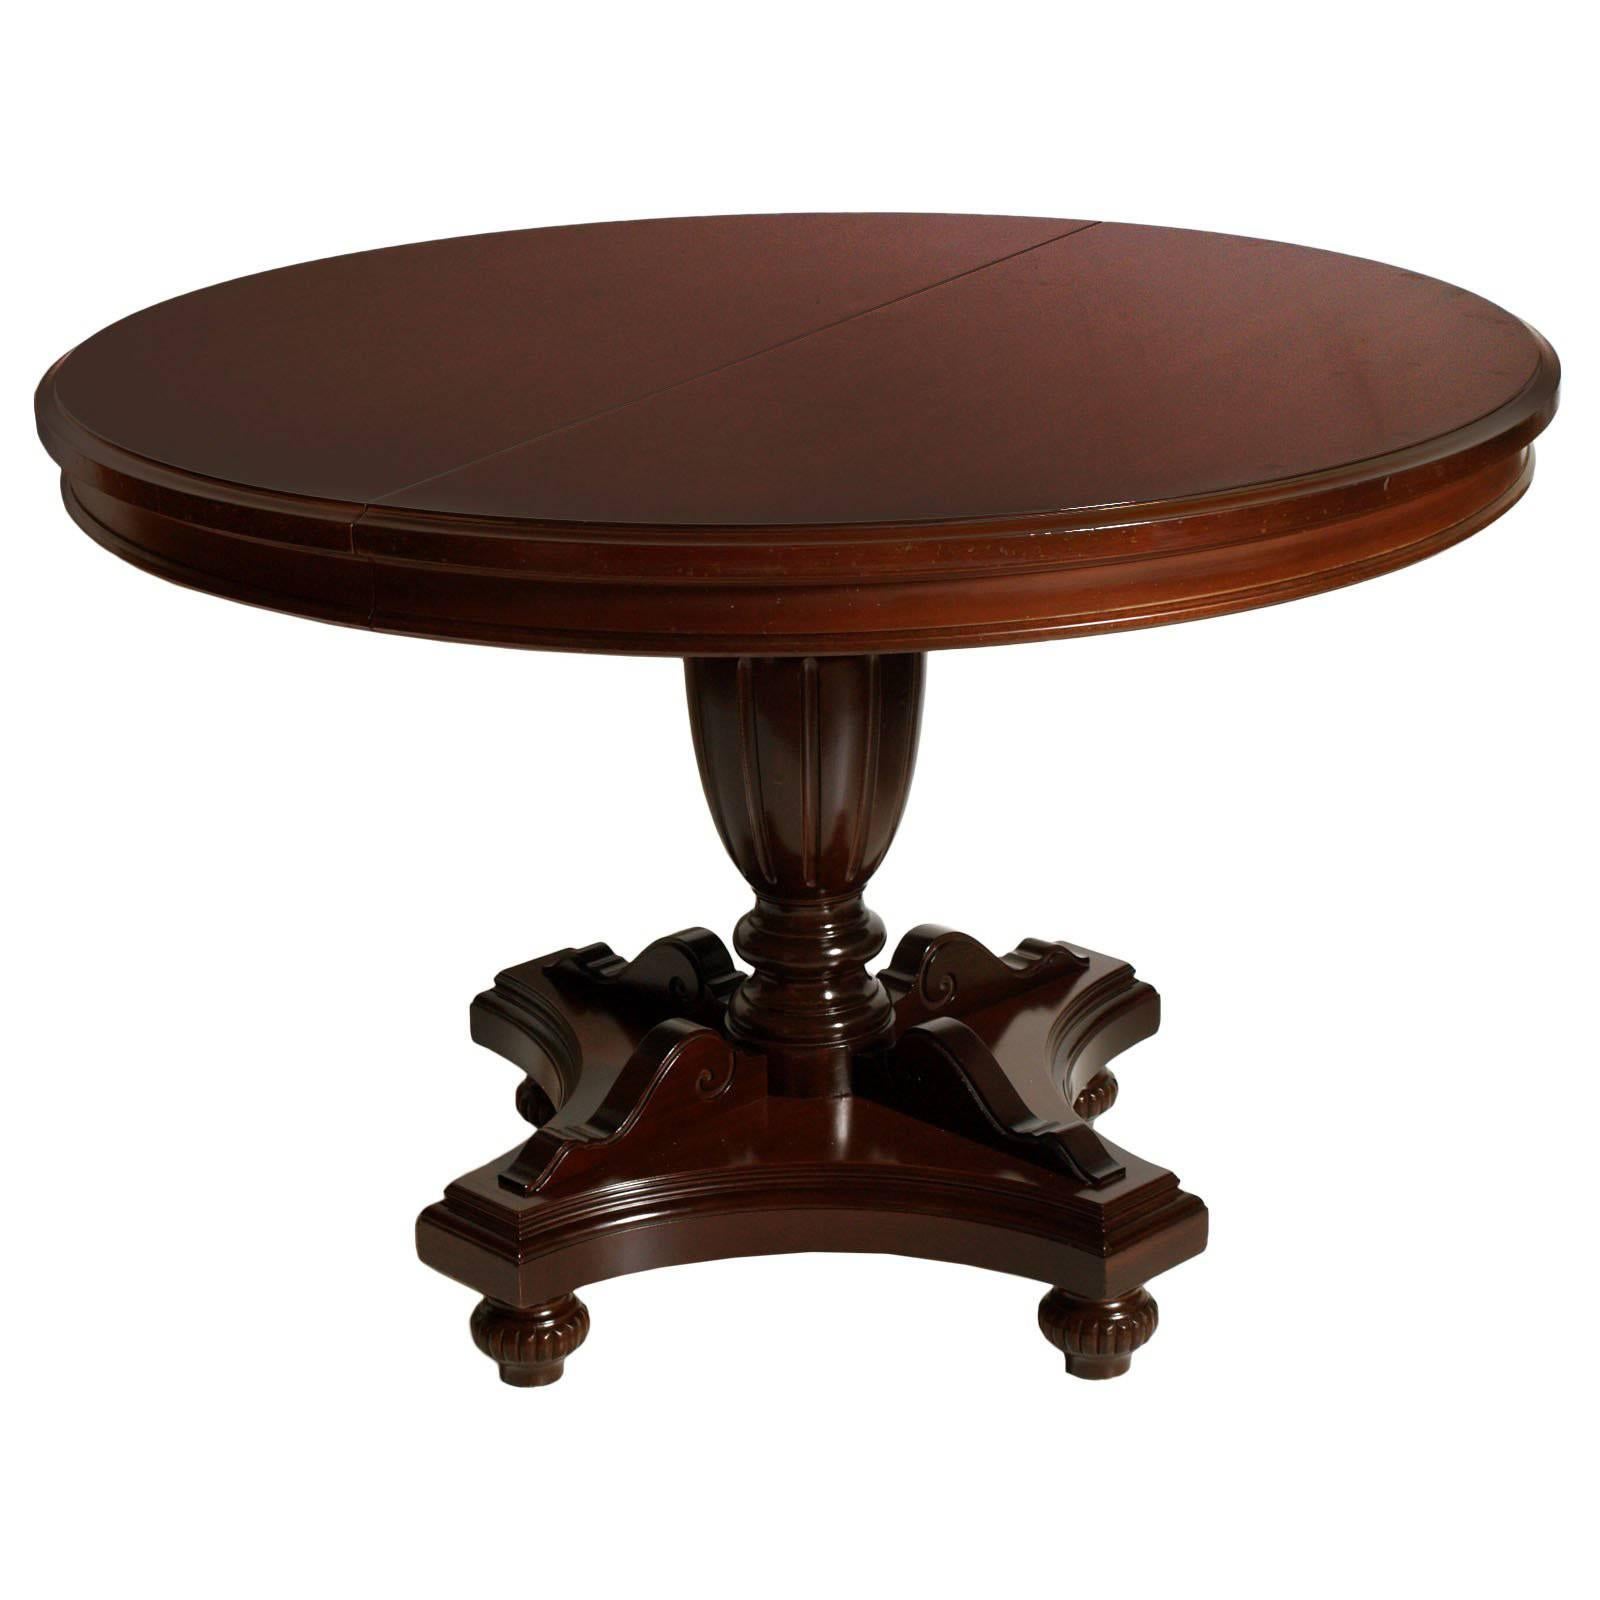 Early 20th Century Italian Extendable Round Table Regency Style Wax-Polished For Sale